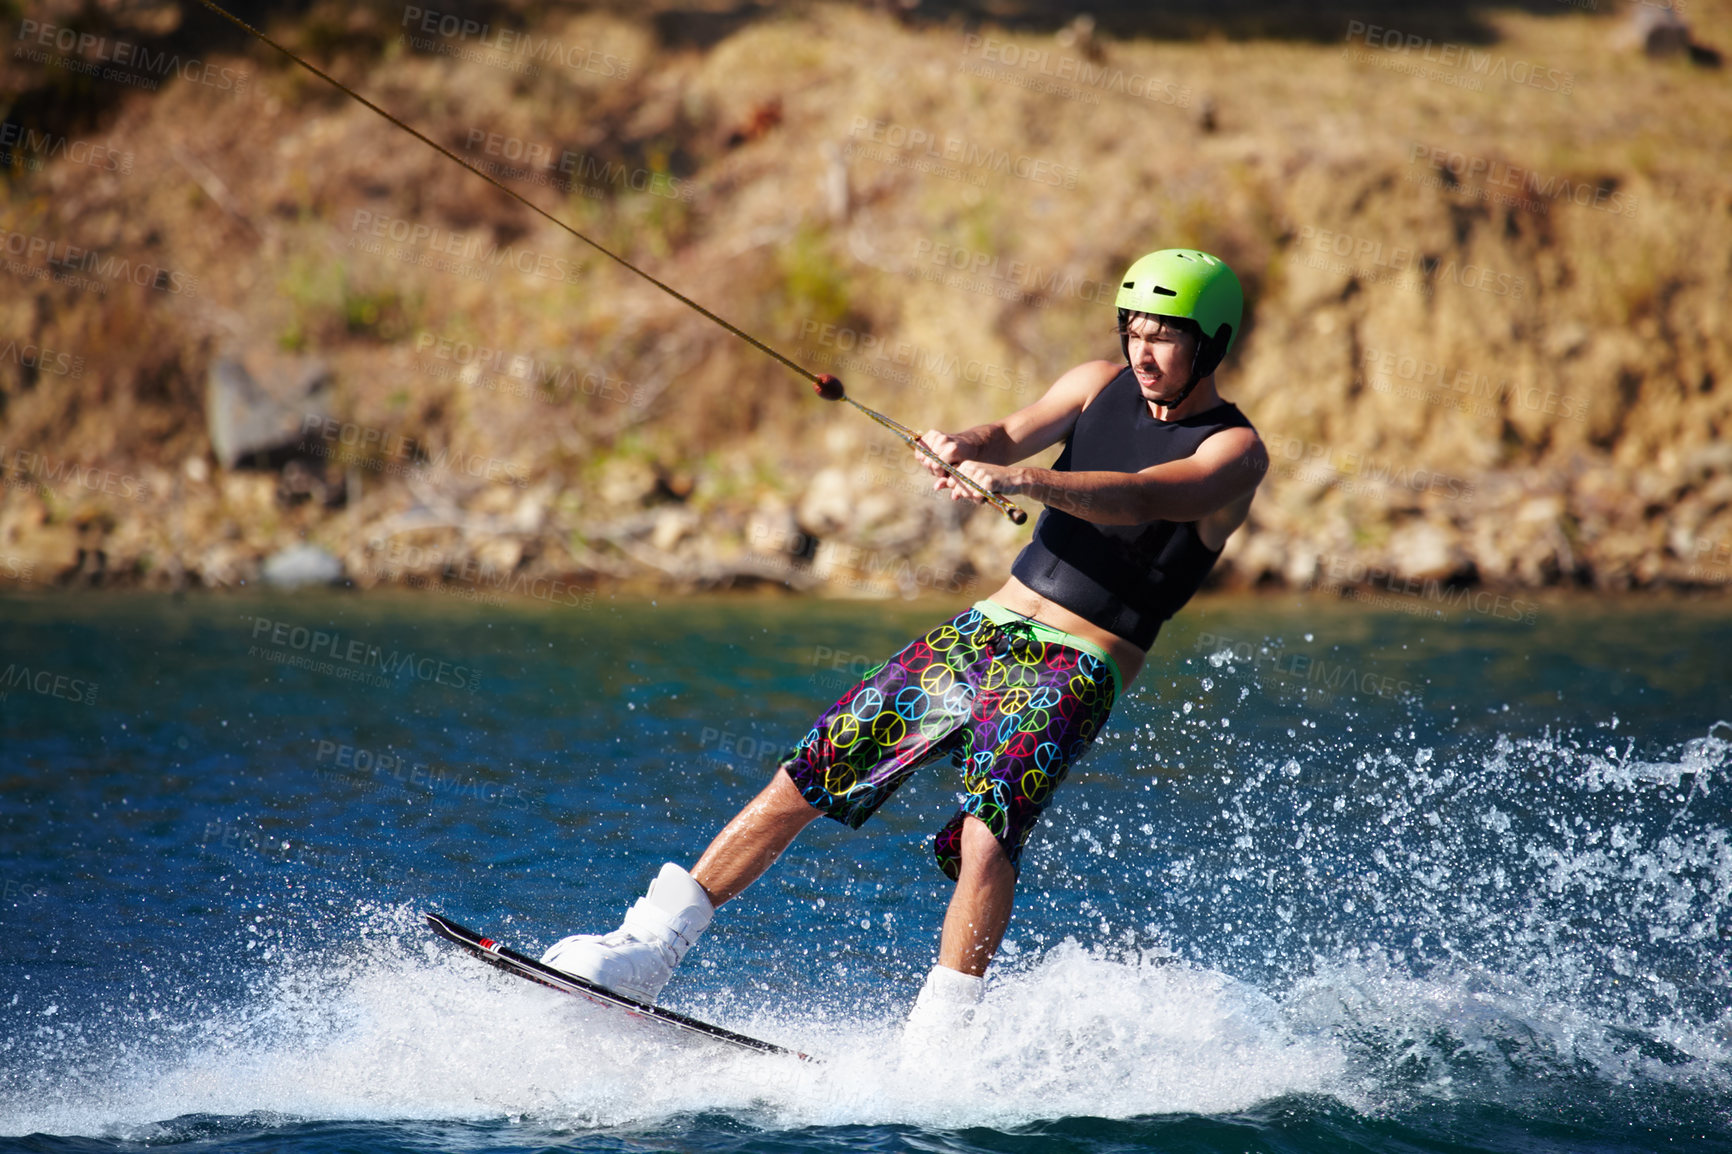 Buy stock photo A young man wearing a helmet and lifejacket wakeboarding on a lake